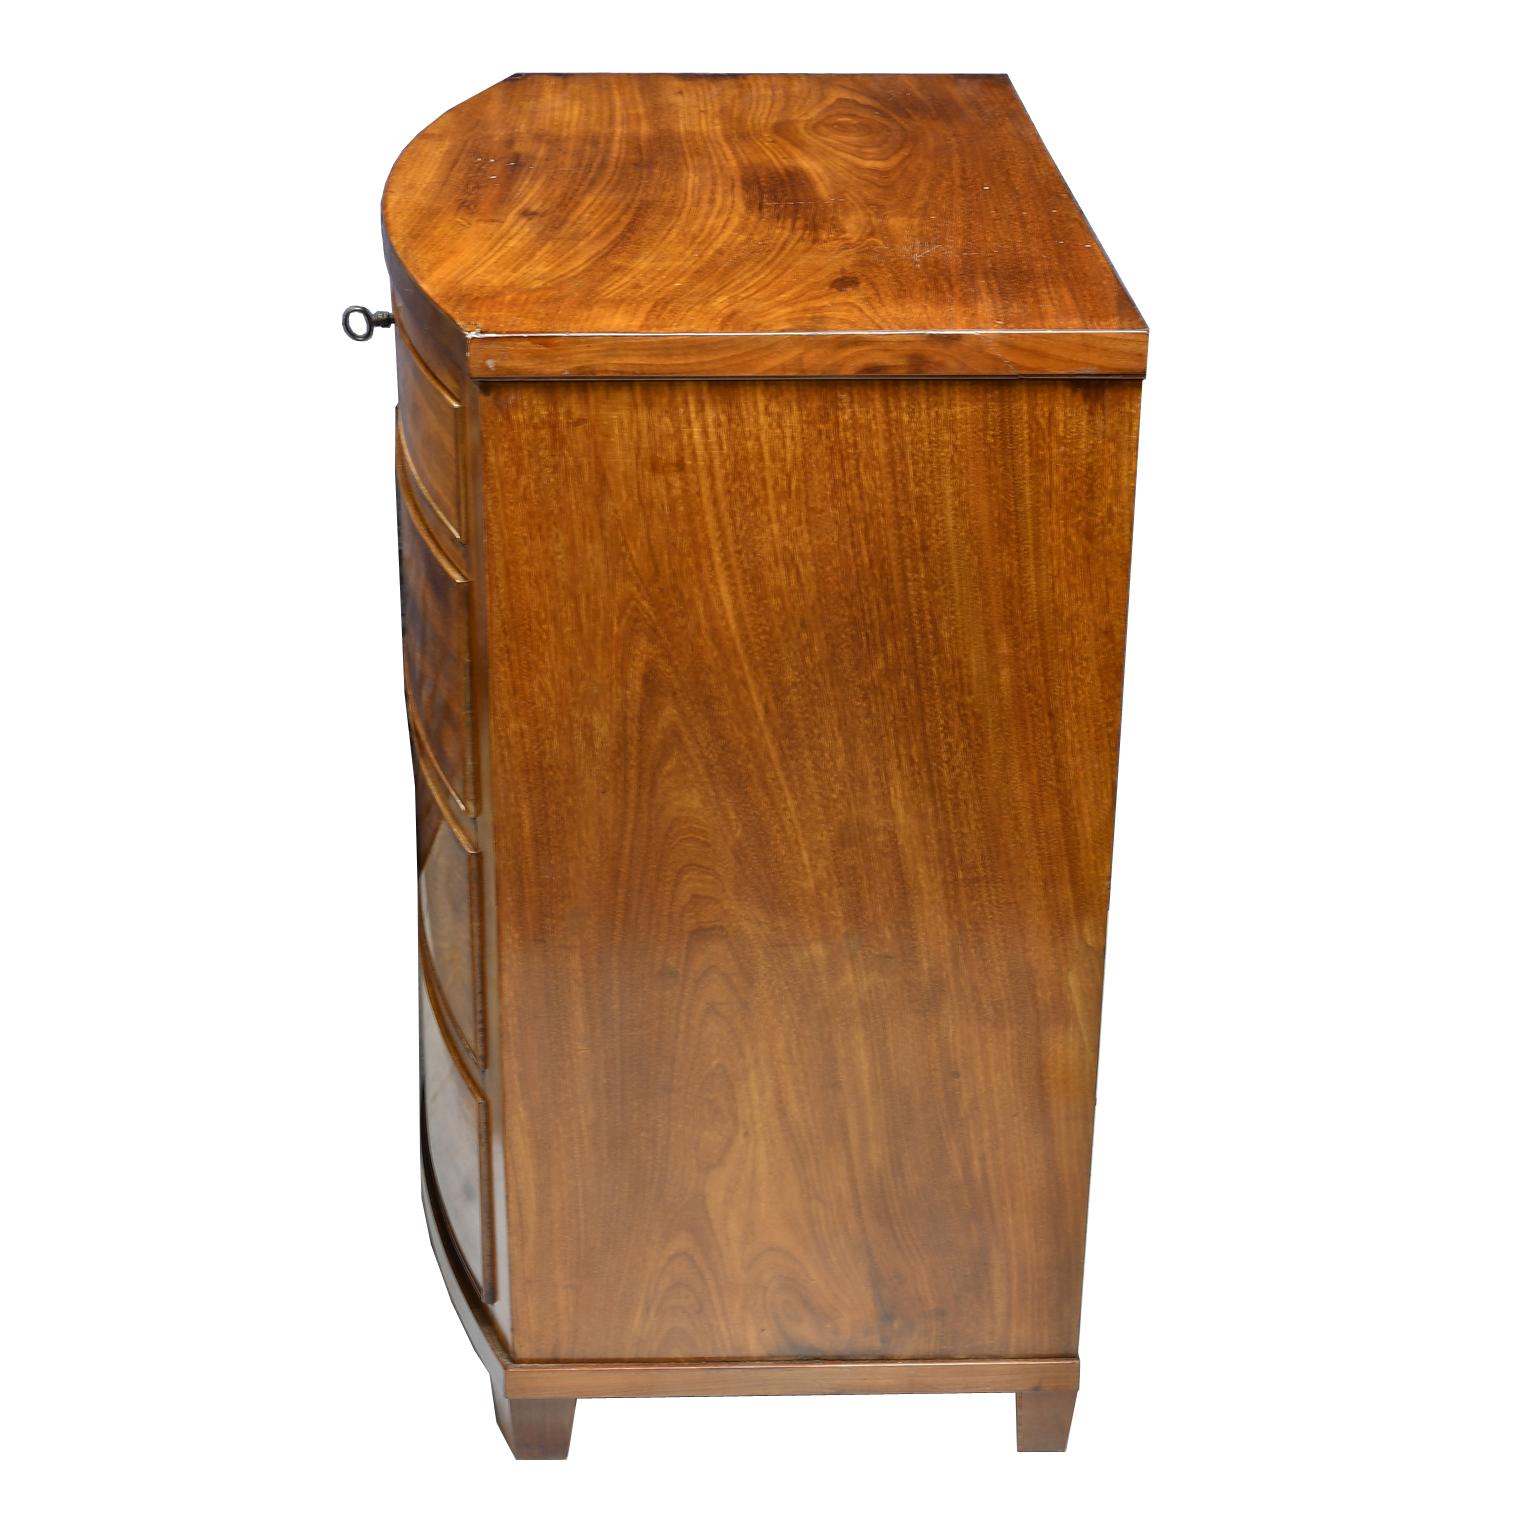 Small Antique Empire Chest of Drawers/Nightstand in West Indies Mahogany, c 1810 1